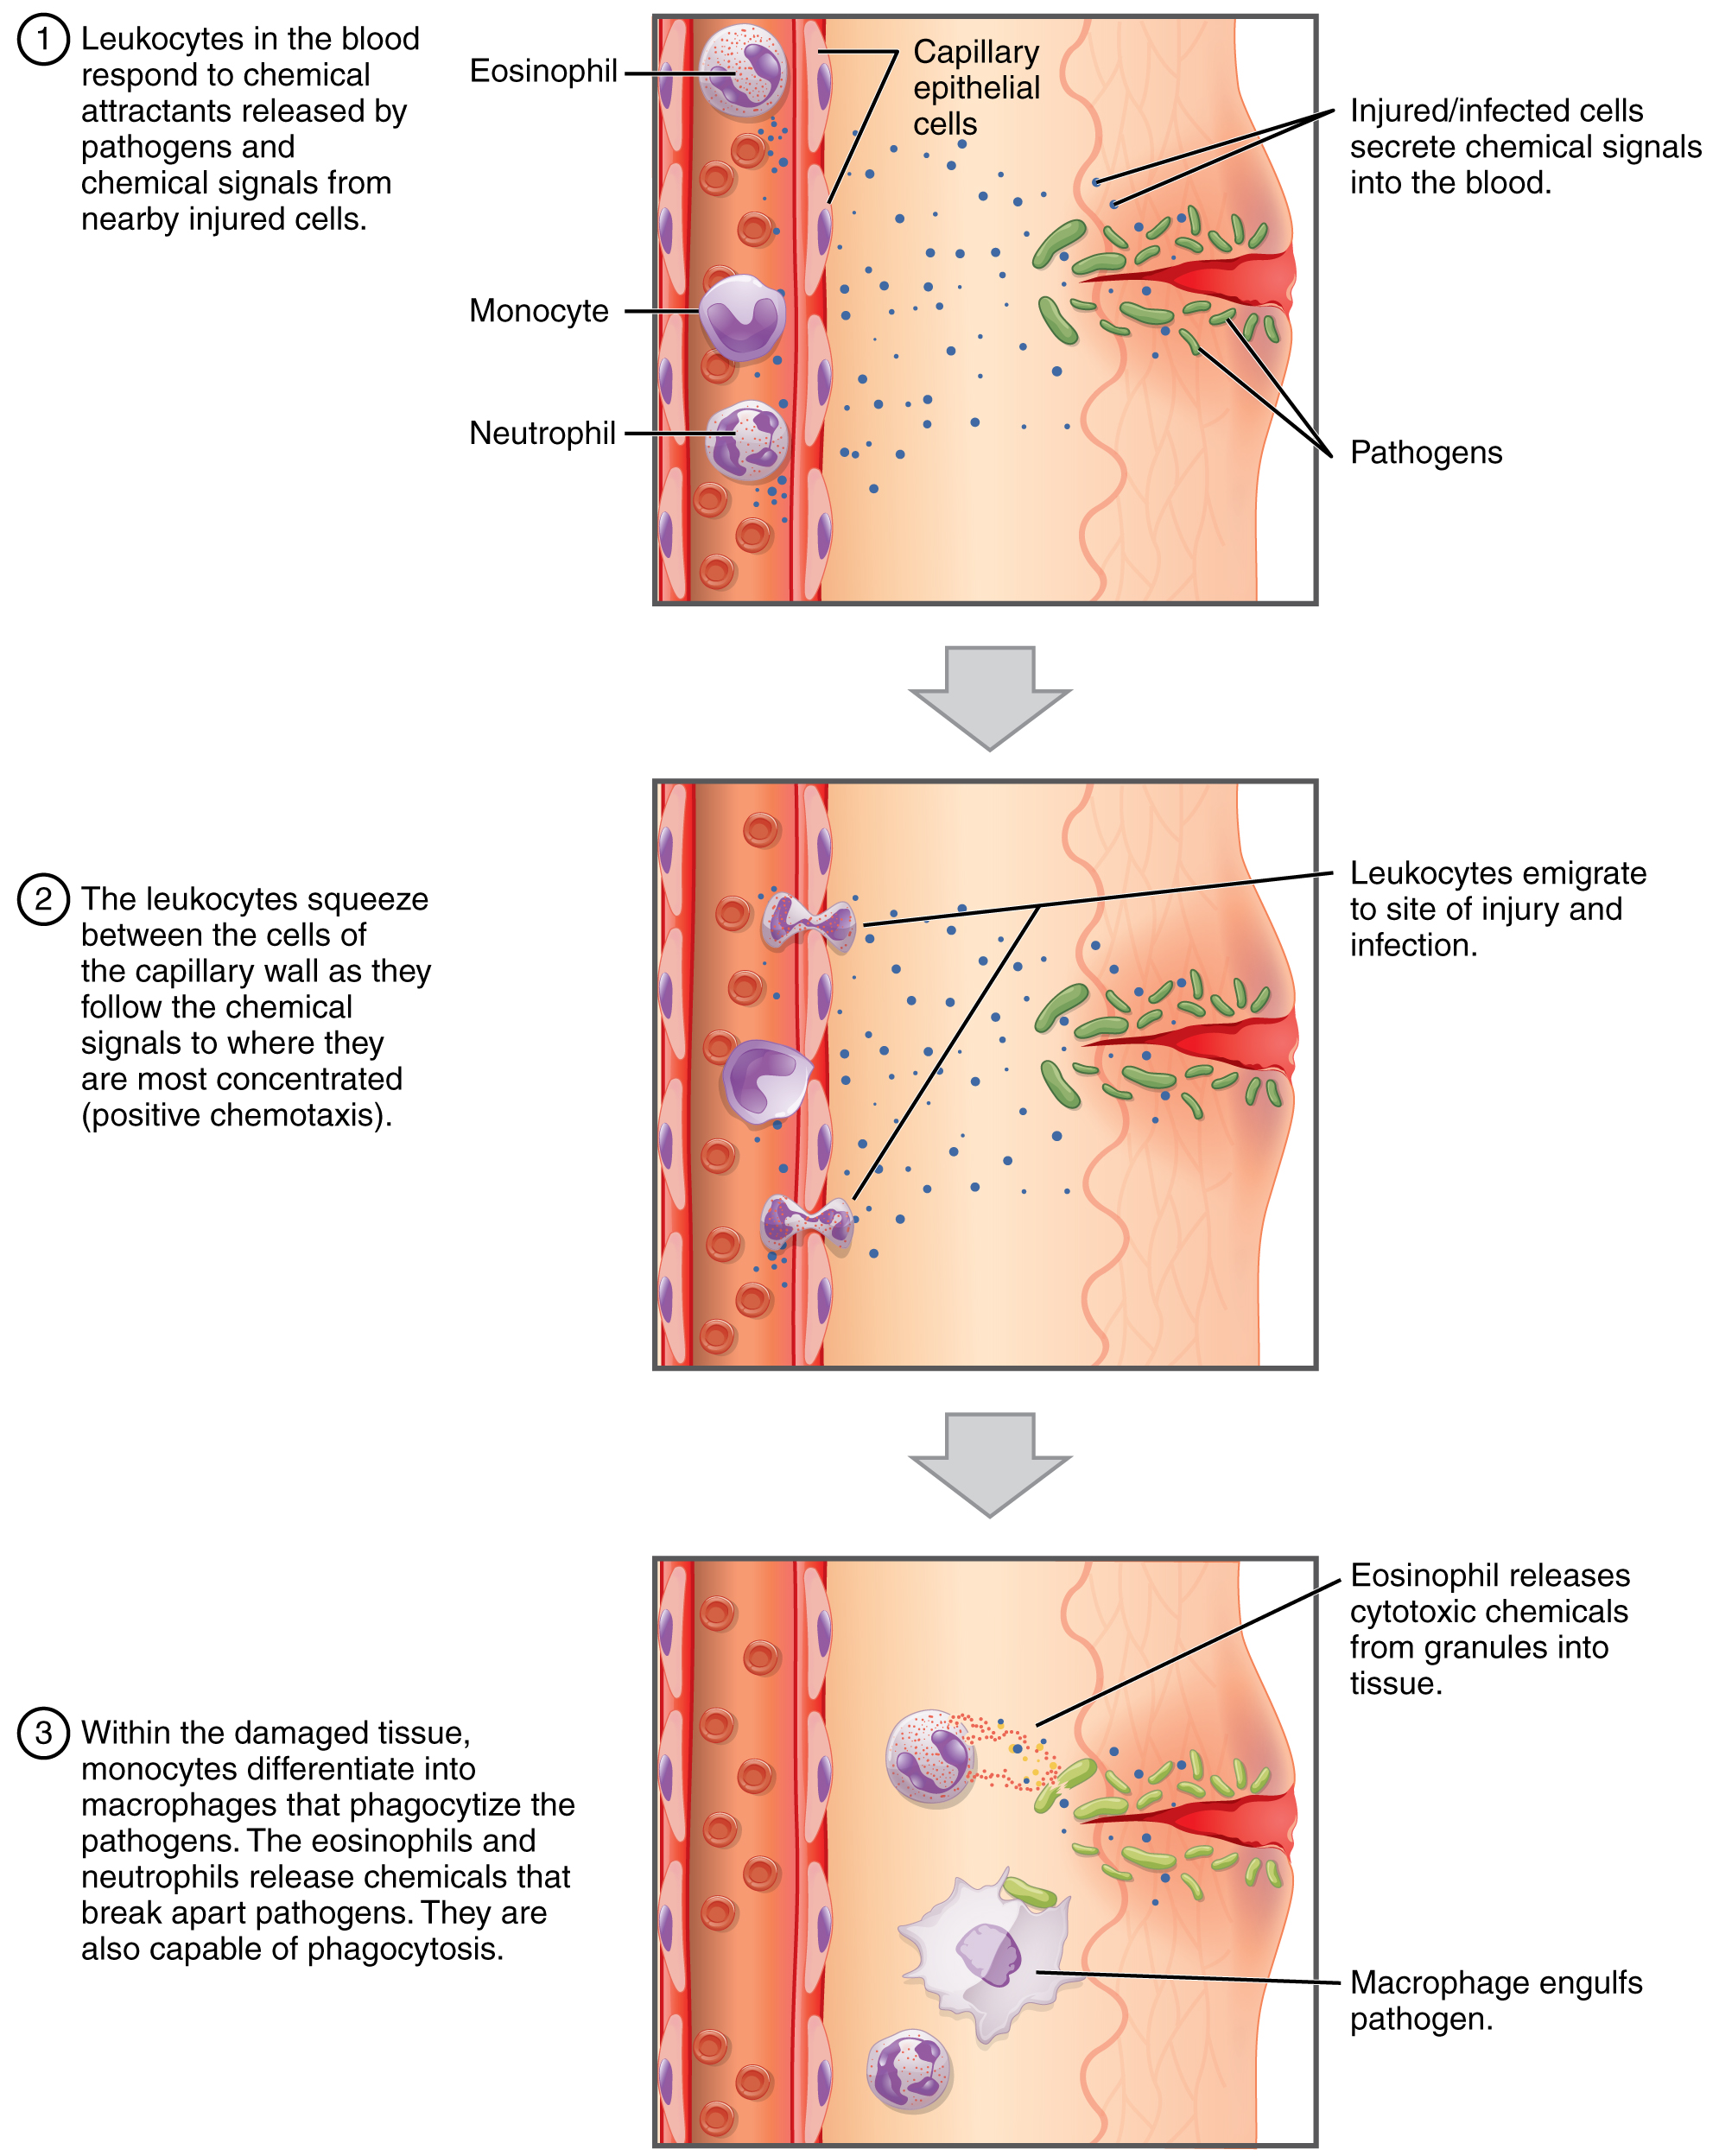 The process of emigration (or diapedesis) is diagrammed. While blood flows through an area, white blood cells are able to move more slowly along the vessel walls and can squeeze between adjacent endothelial cells to exit capillaries. Sometimes this occurs so a leukocyte may travel to its final destination in the body's tissues and other times this occurs when a leukocyte responds to a chemical message summoning it to the site of an injury or infection.